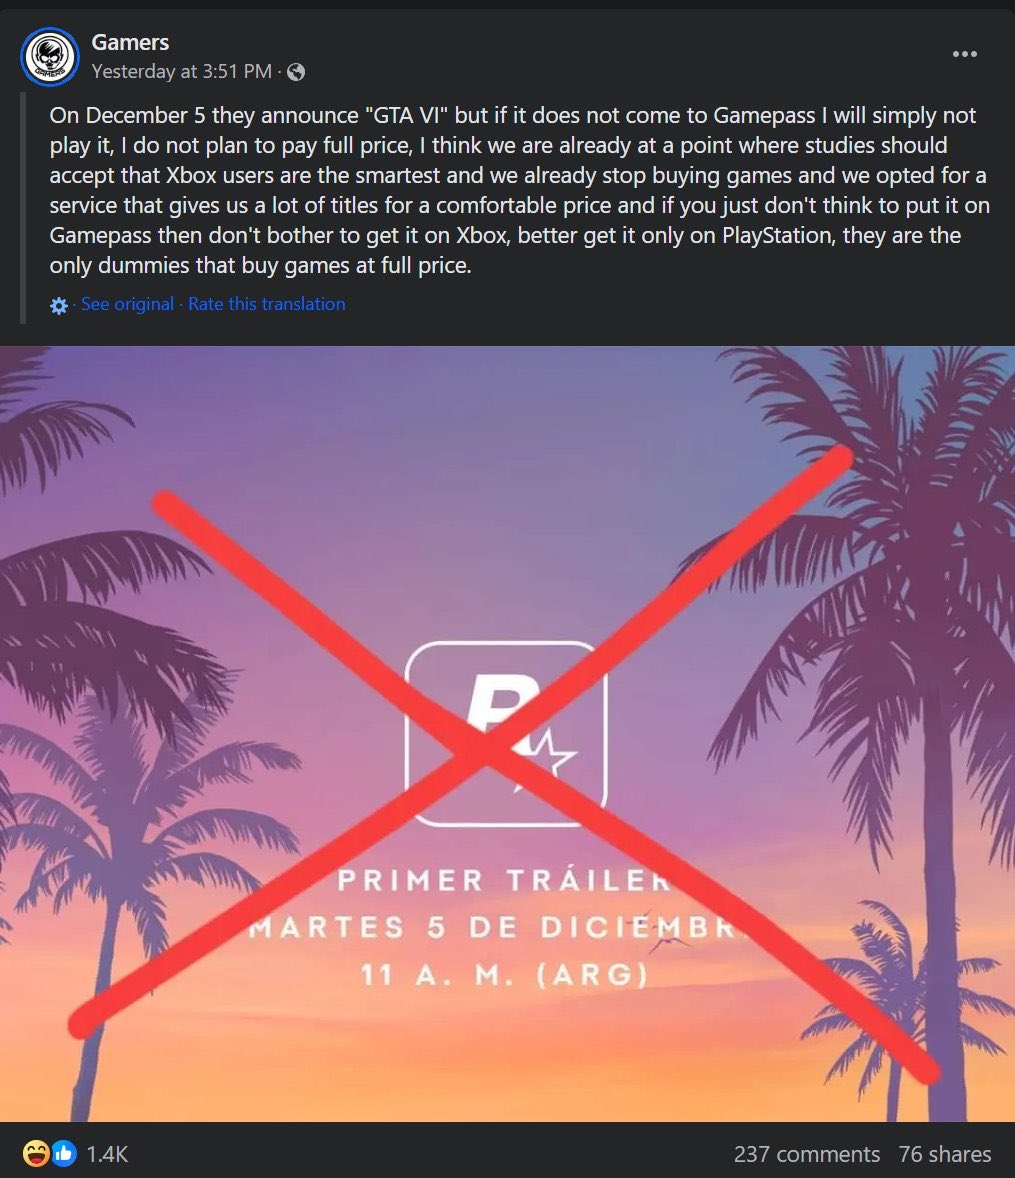 User claims to boycott Grand Theft Auto 6 if it isn’t released on Game Pass.